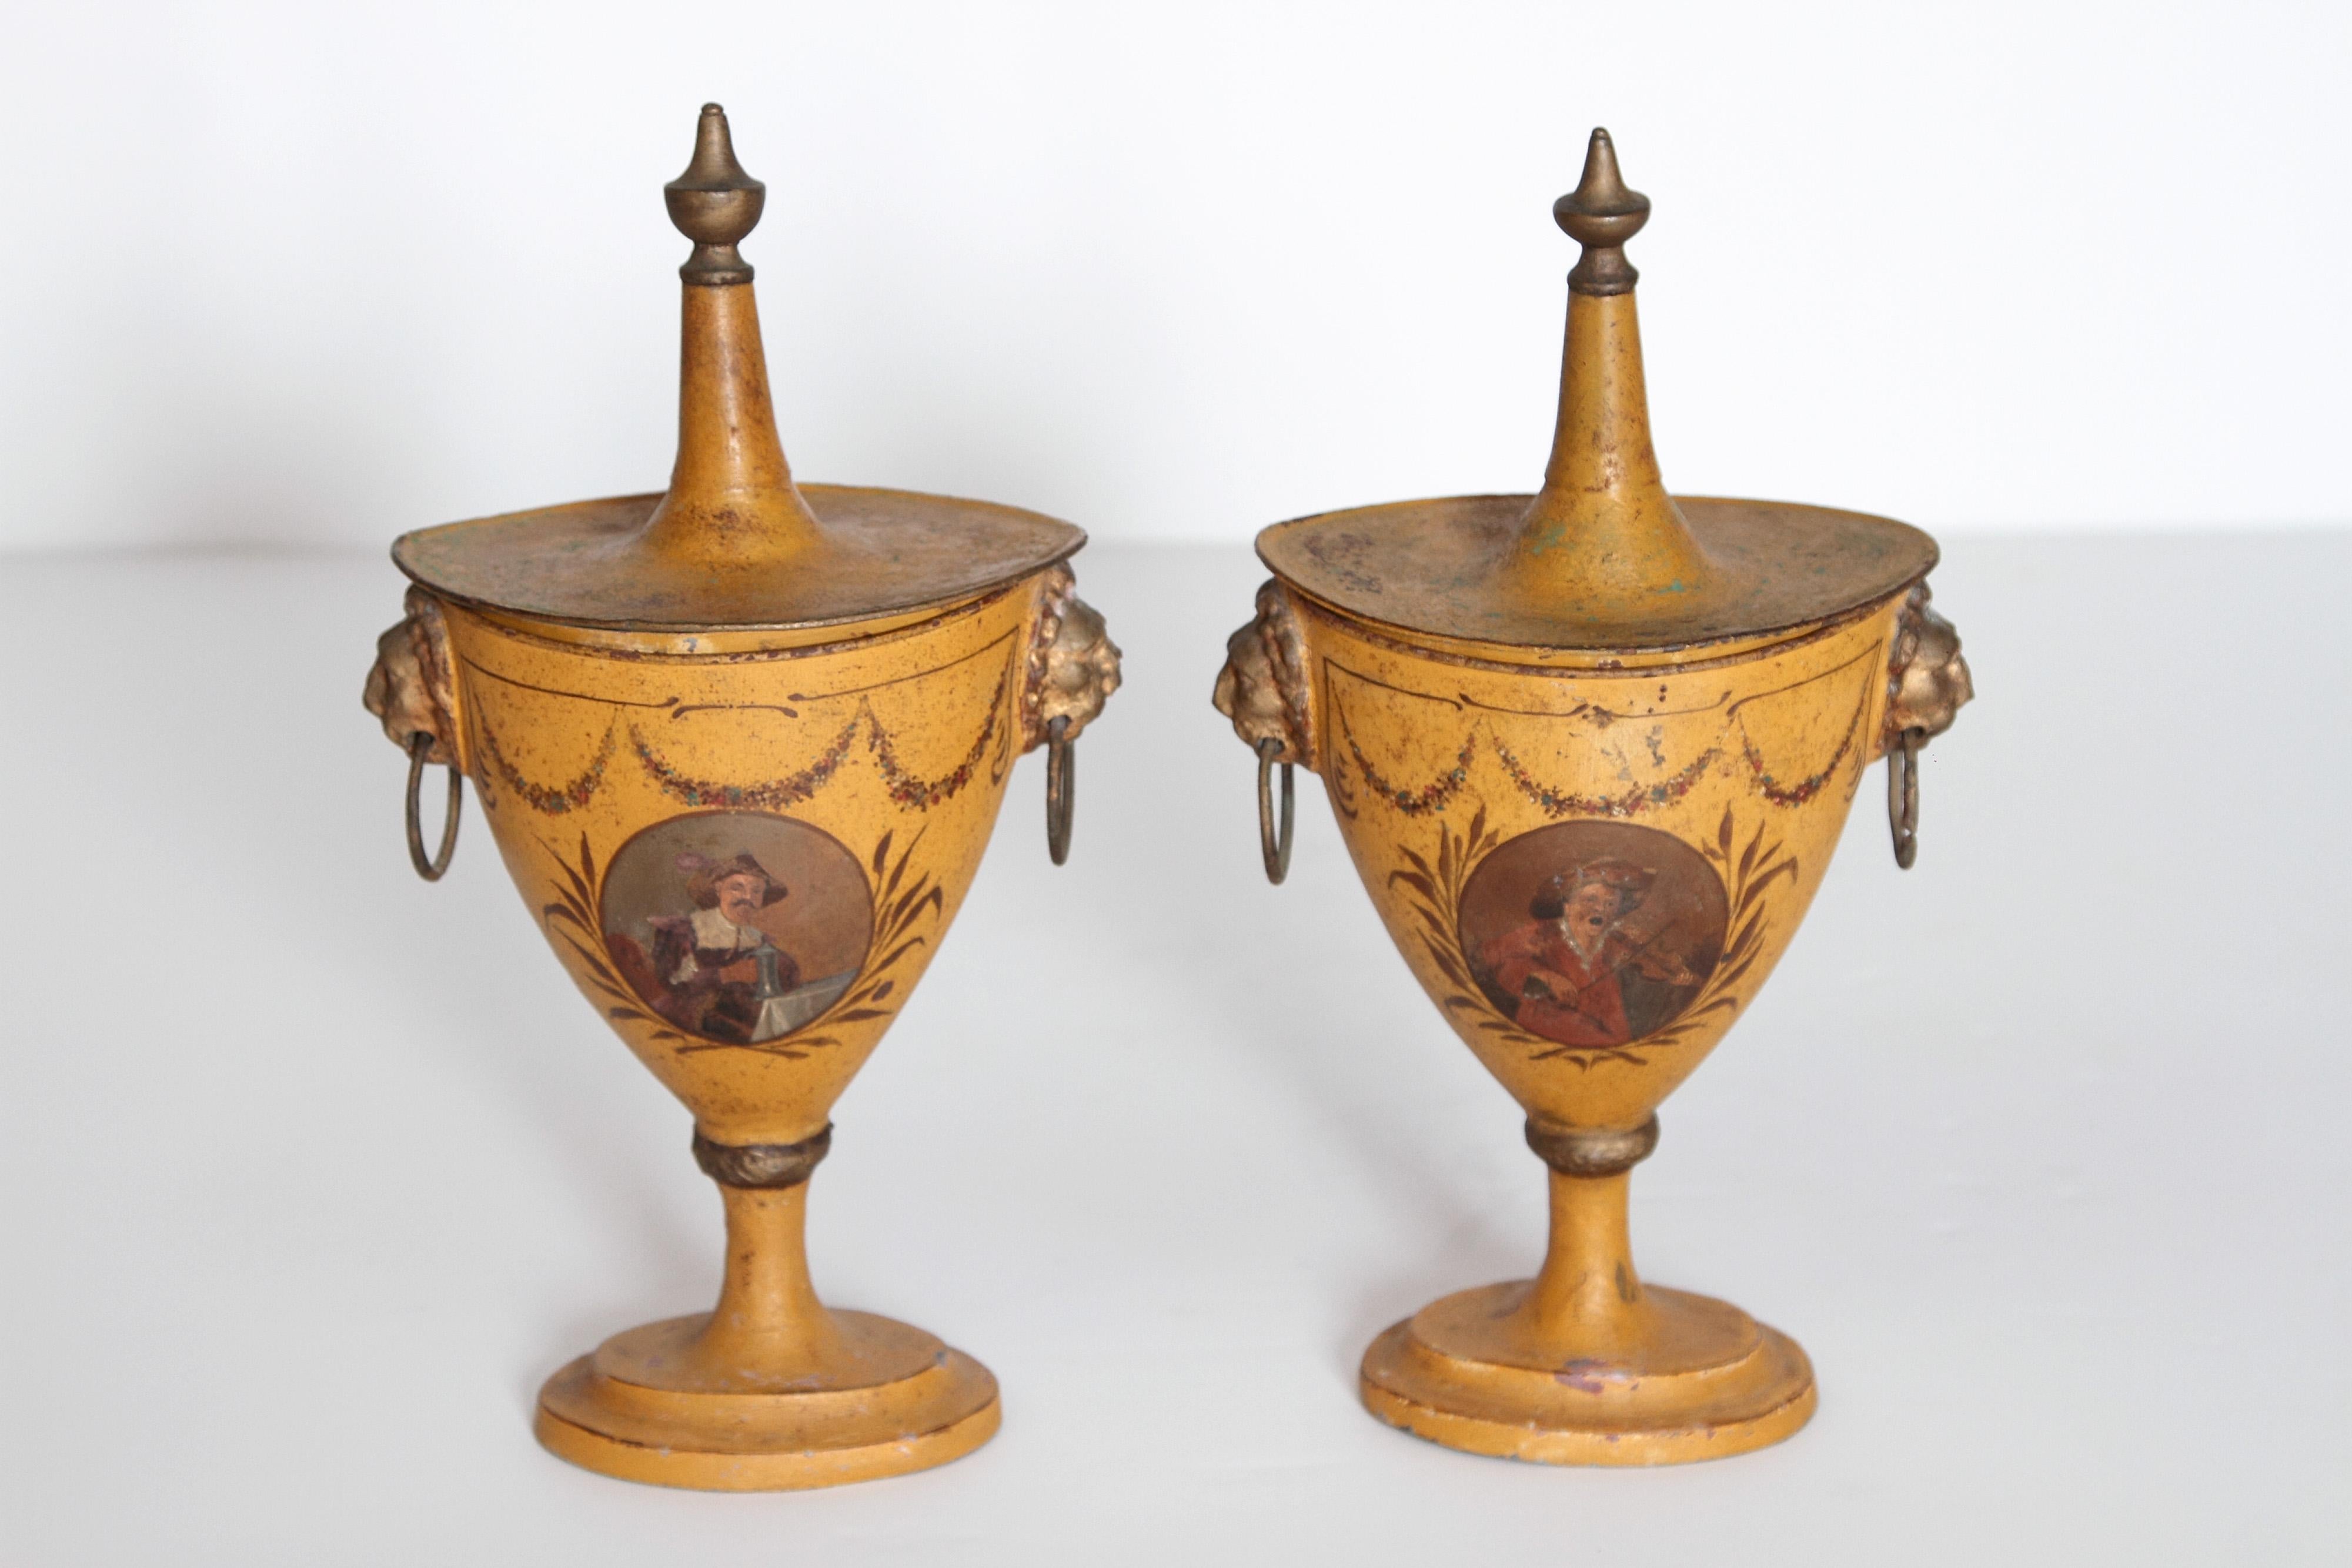 Pair of English Regency Tole Painted Chestnut Urns 1